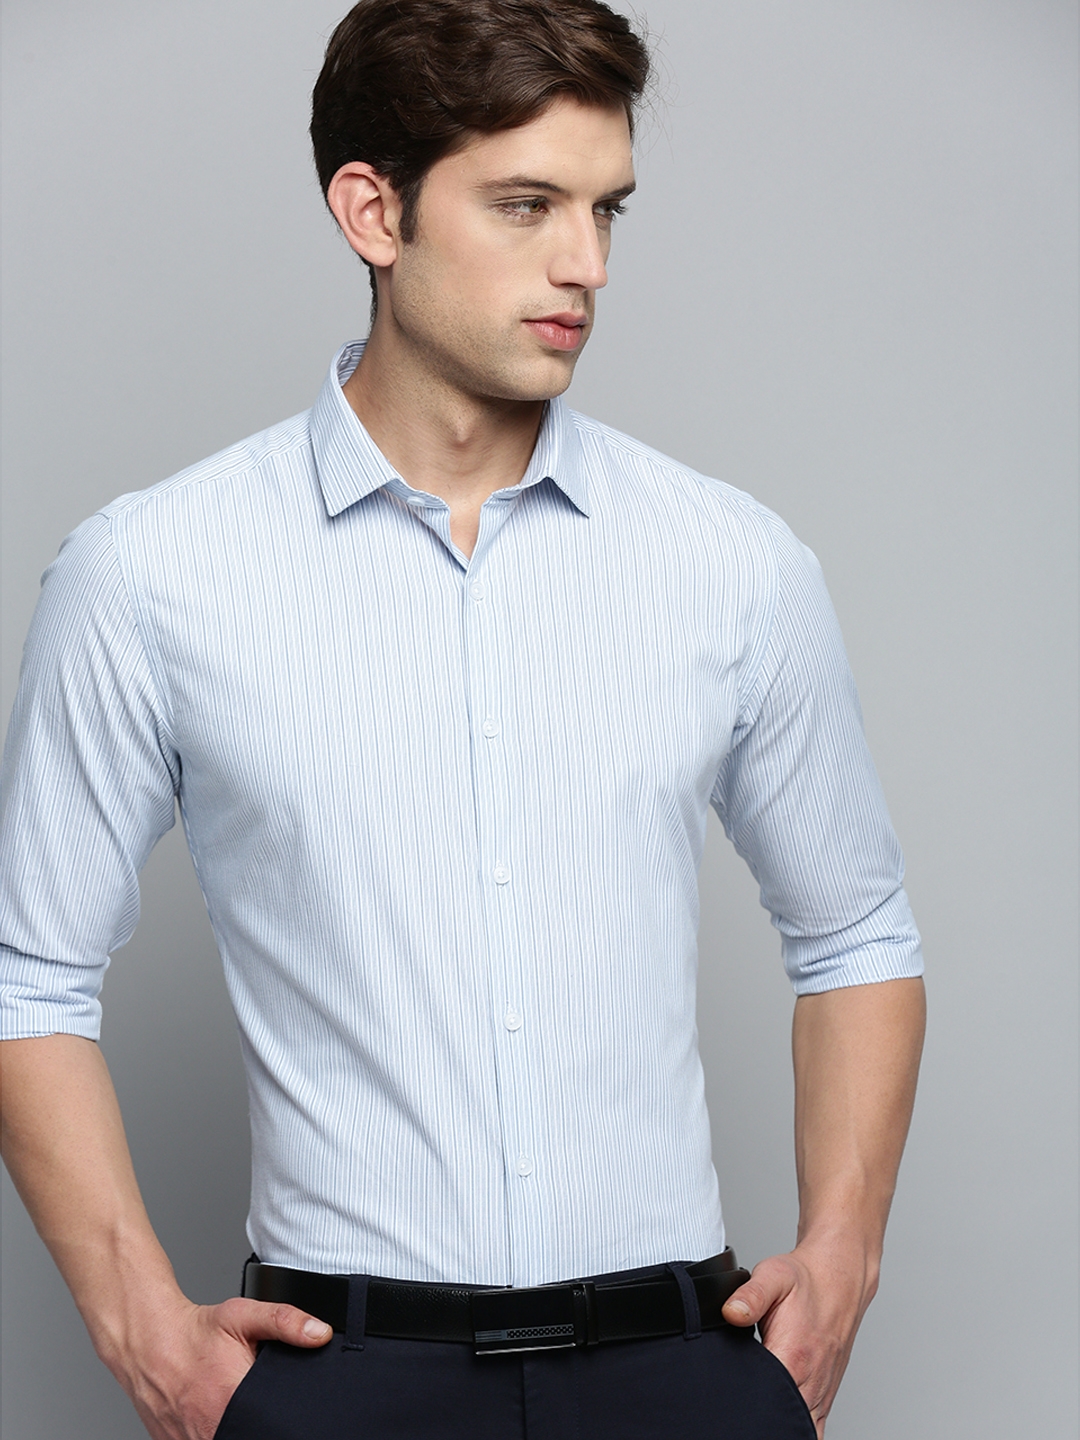 Showoff | SHOWOFF Men's Spread Collar Striped White Classic Shirt 0